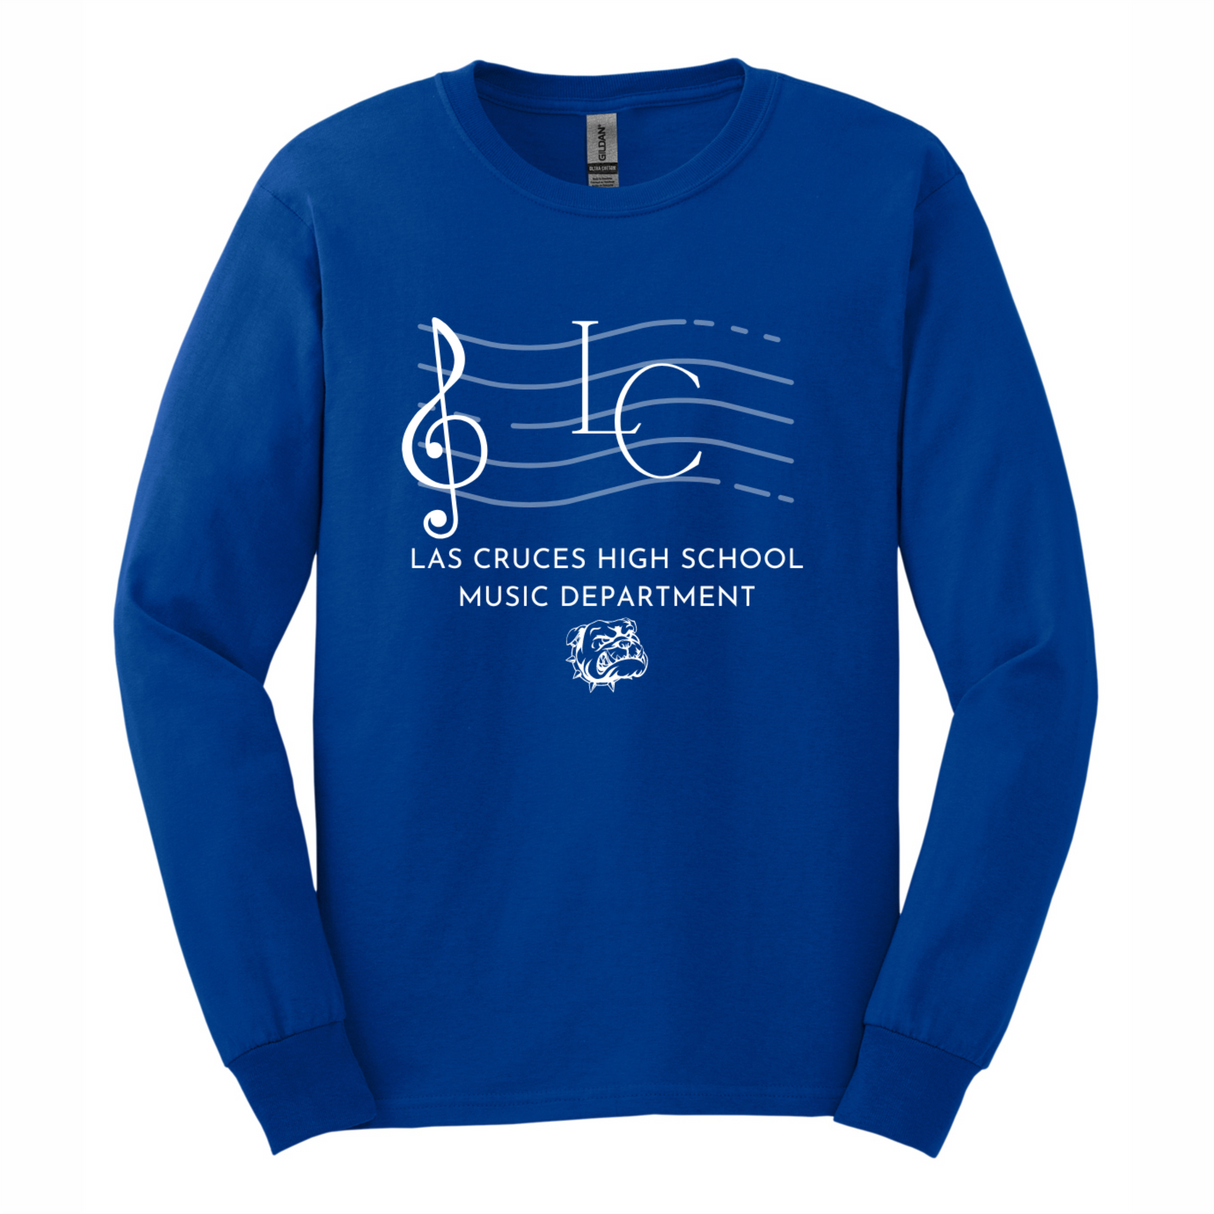 LCHS Band Music Department Long-Sleeve Cotton Tee